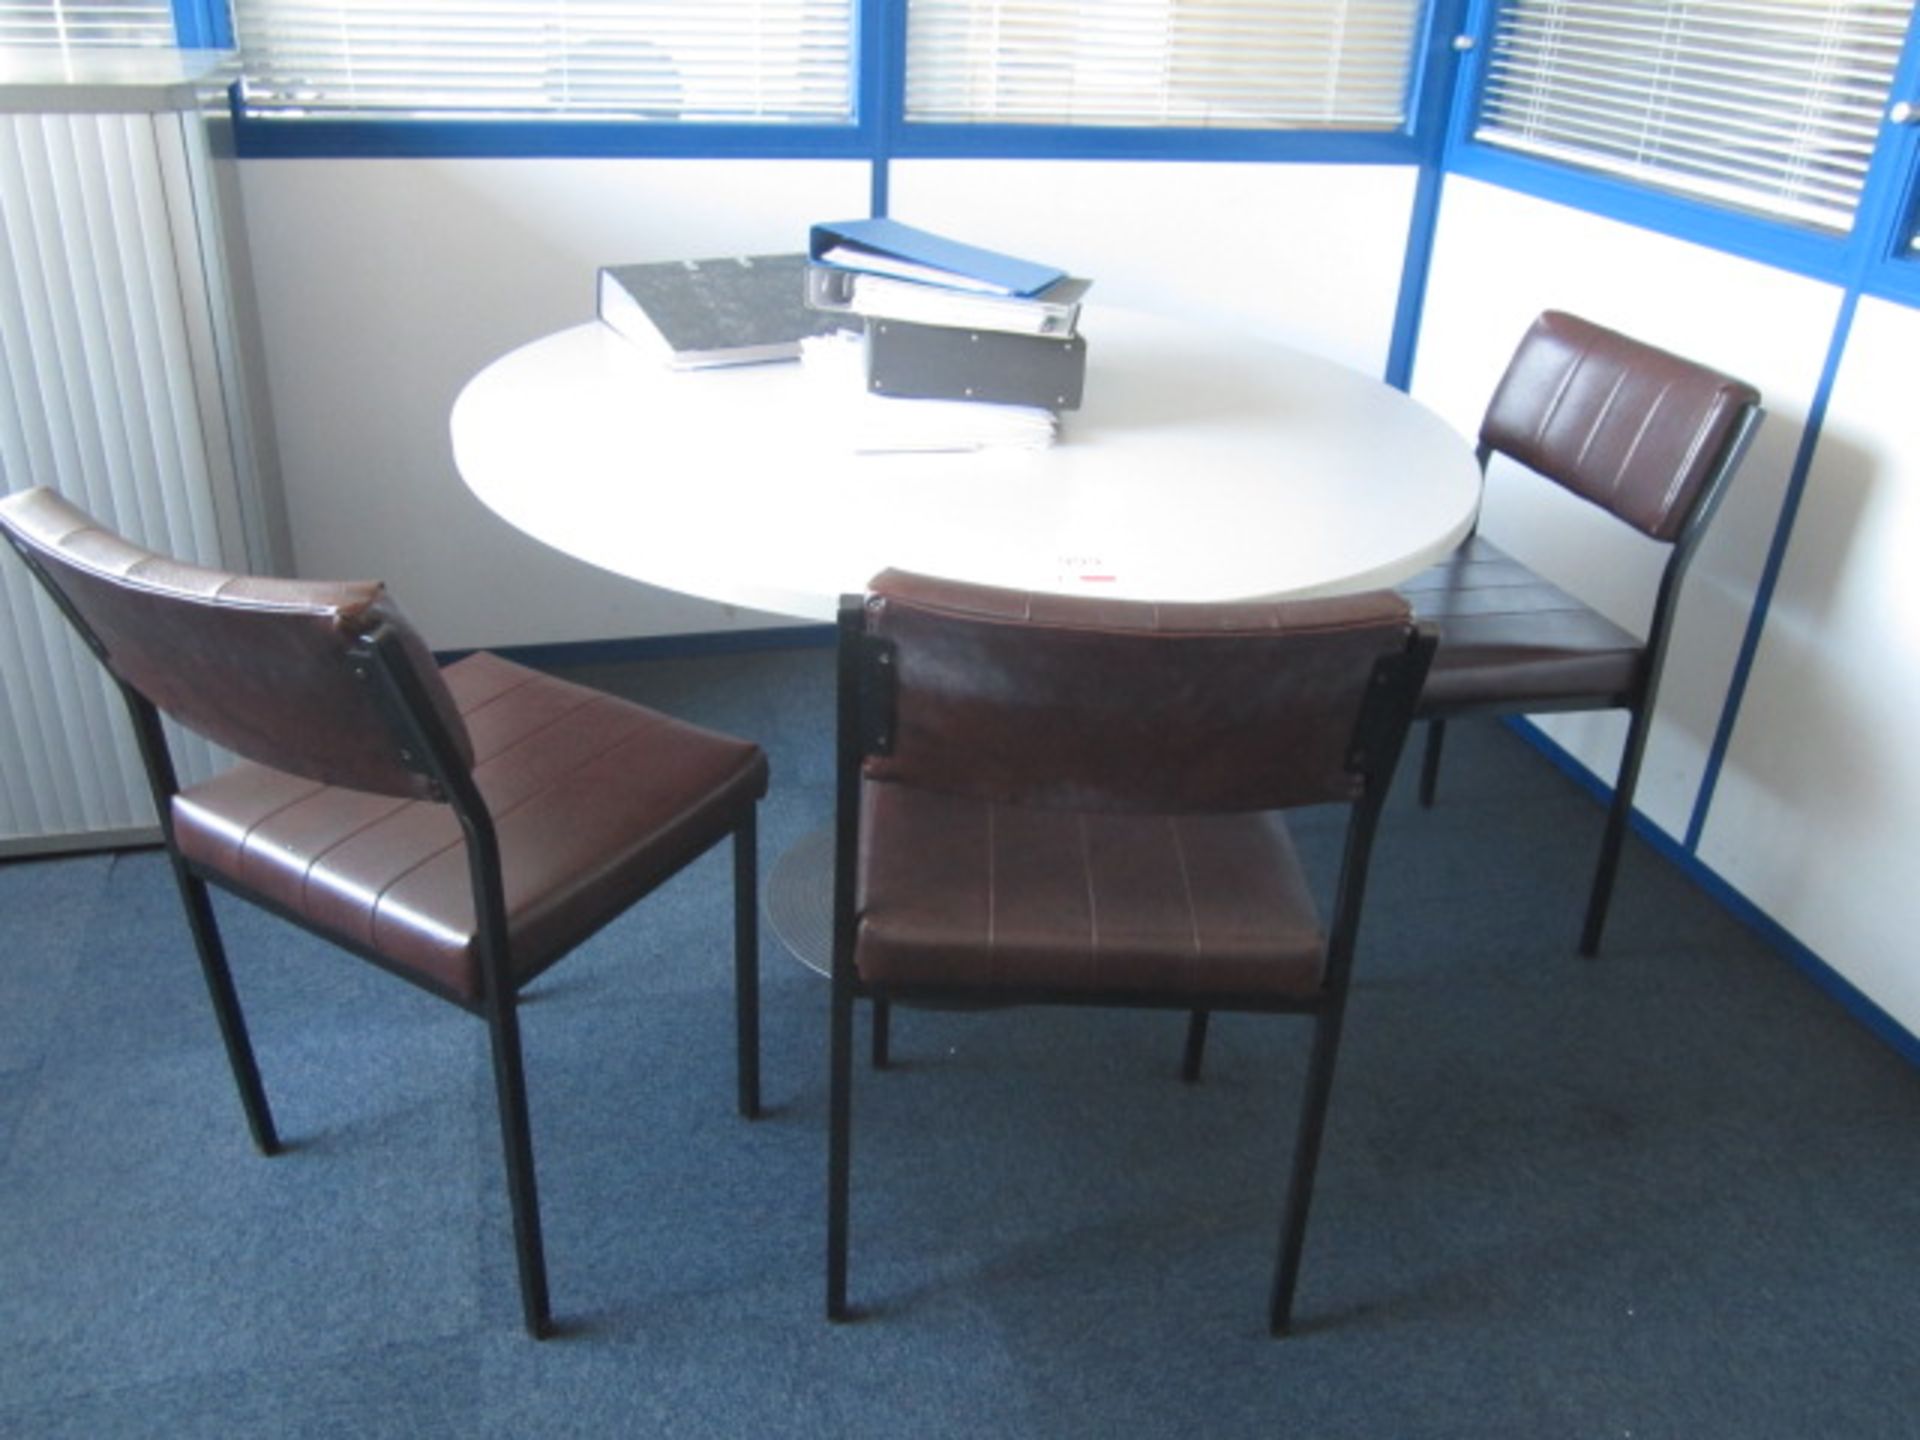 Grey melamine circular meeting table with four vinyl meeting chairs